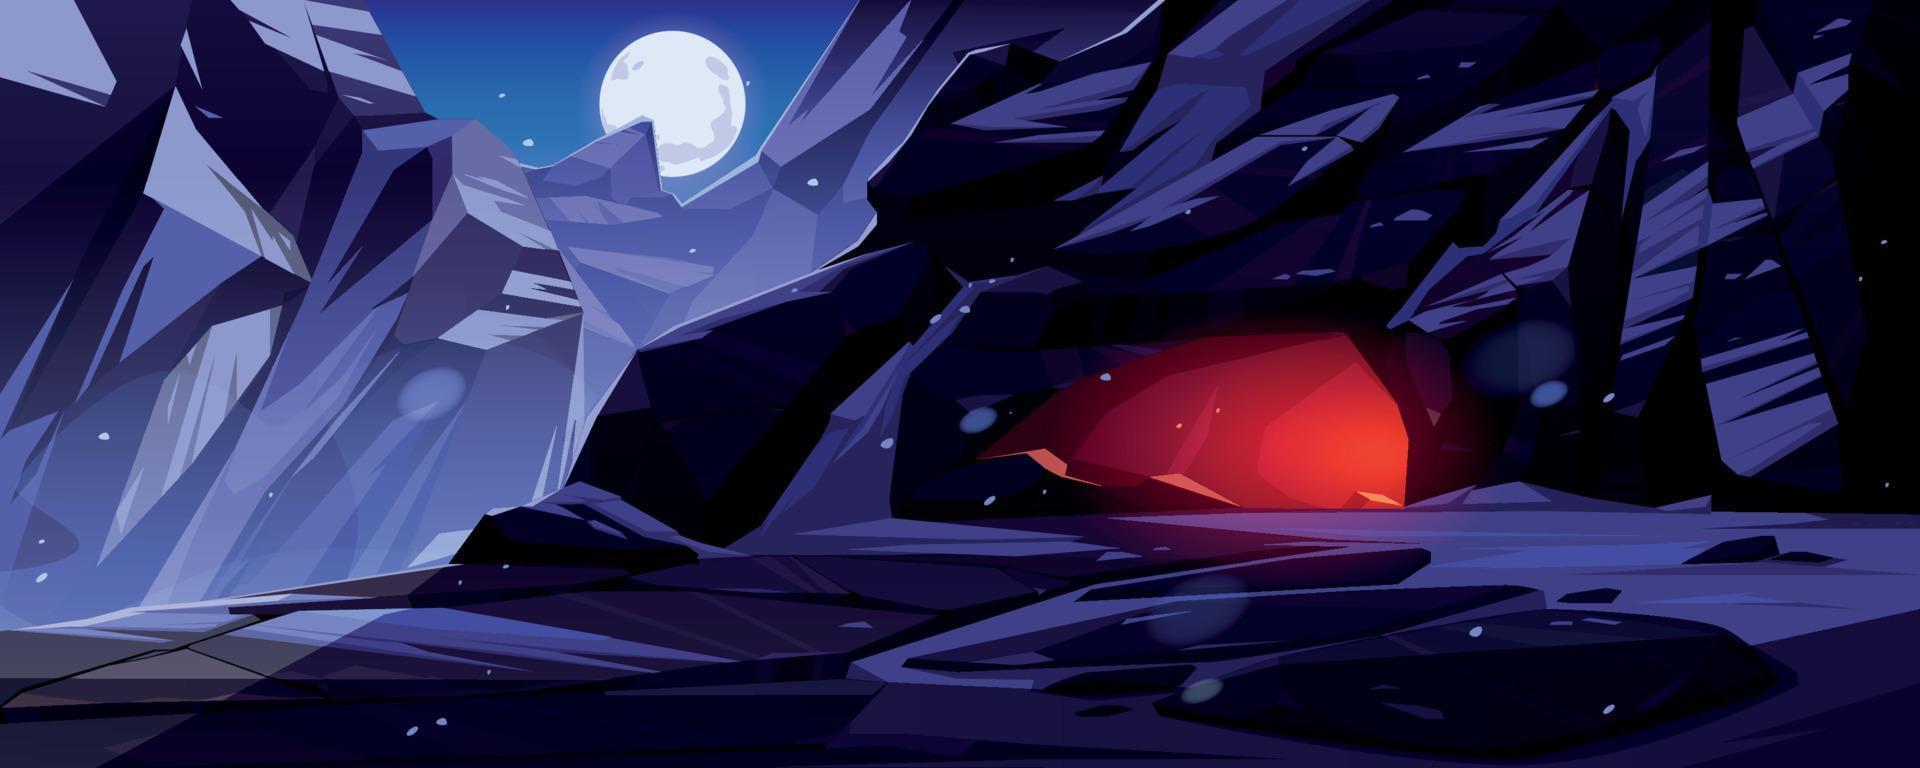 Entrance to cave in mountains at night vector